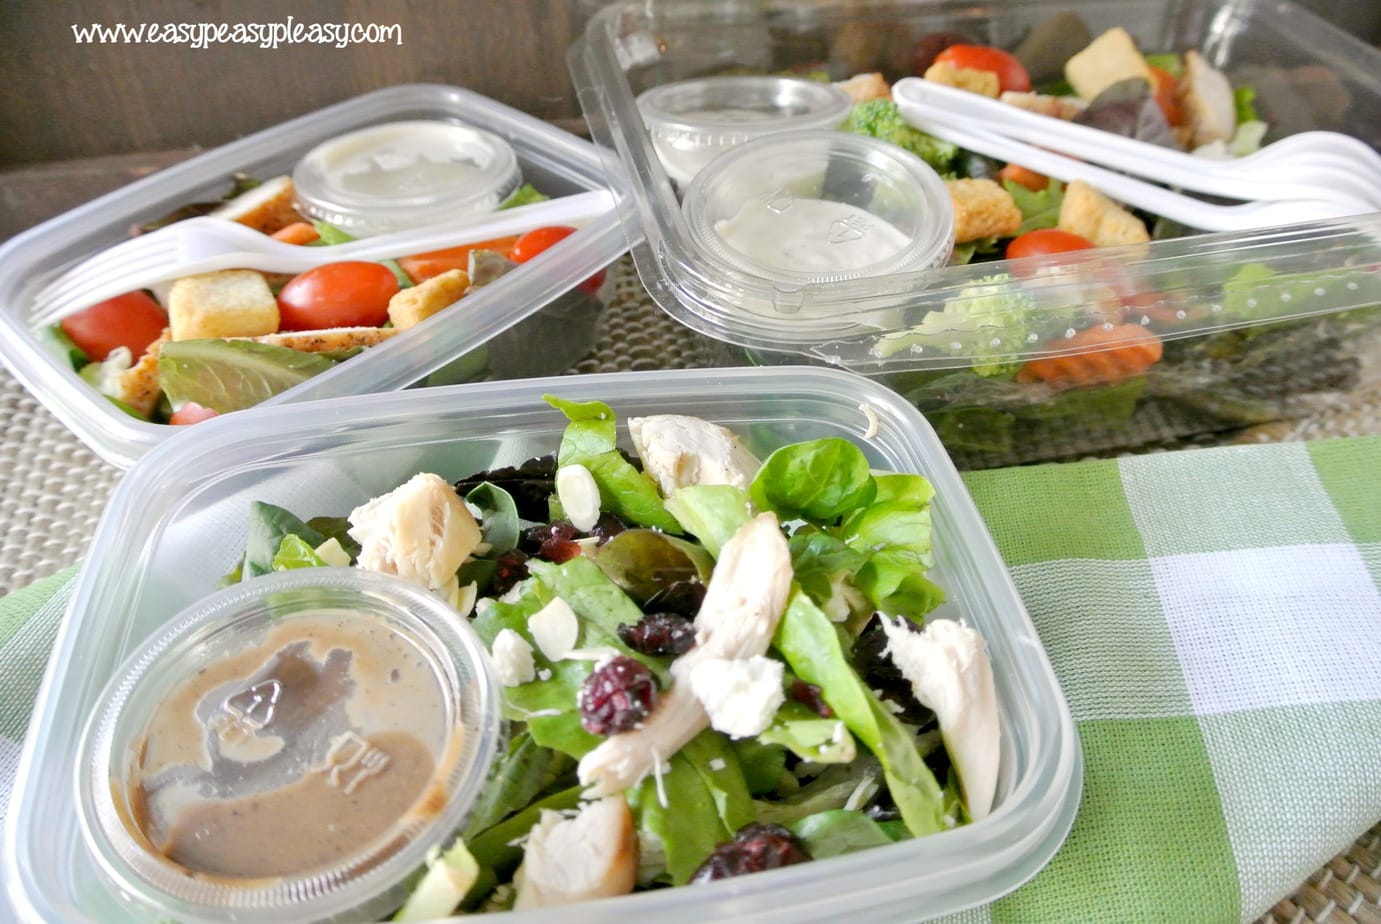 Easy TO GO Salads For The Cooler With No Cleanup - Easy Peasy Pleasy